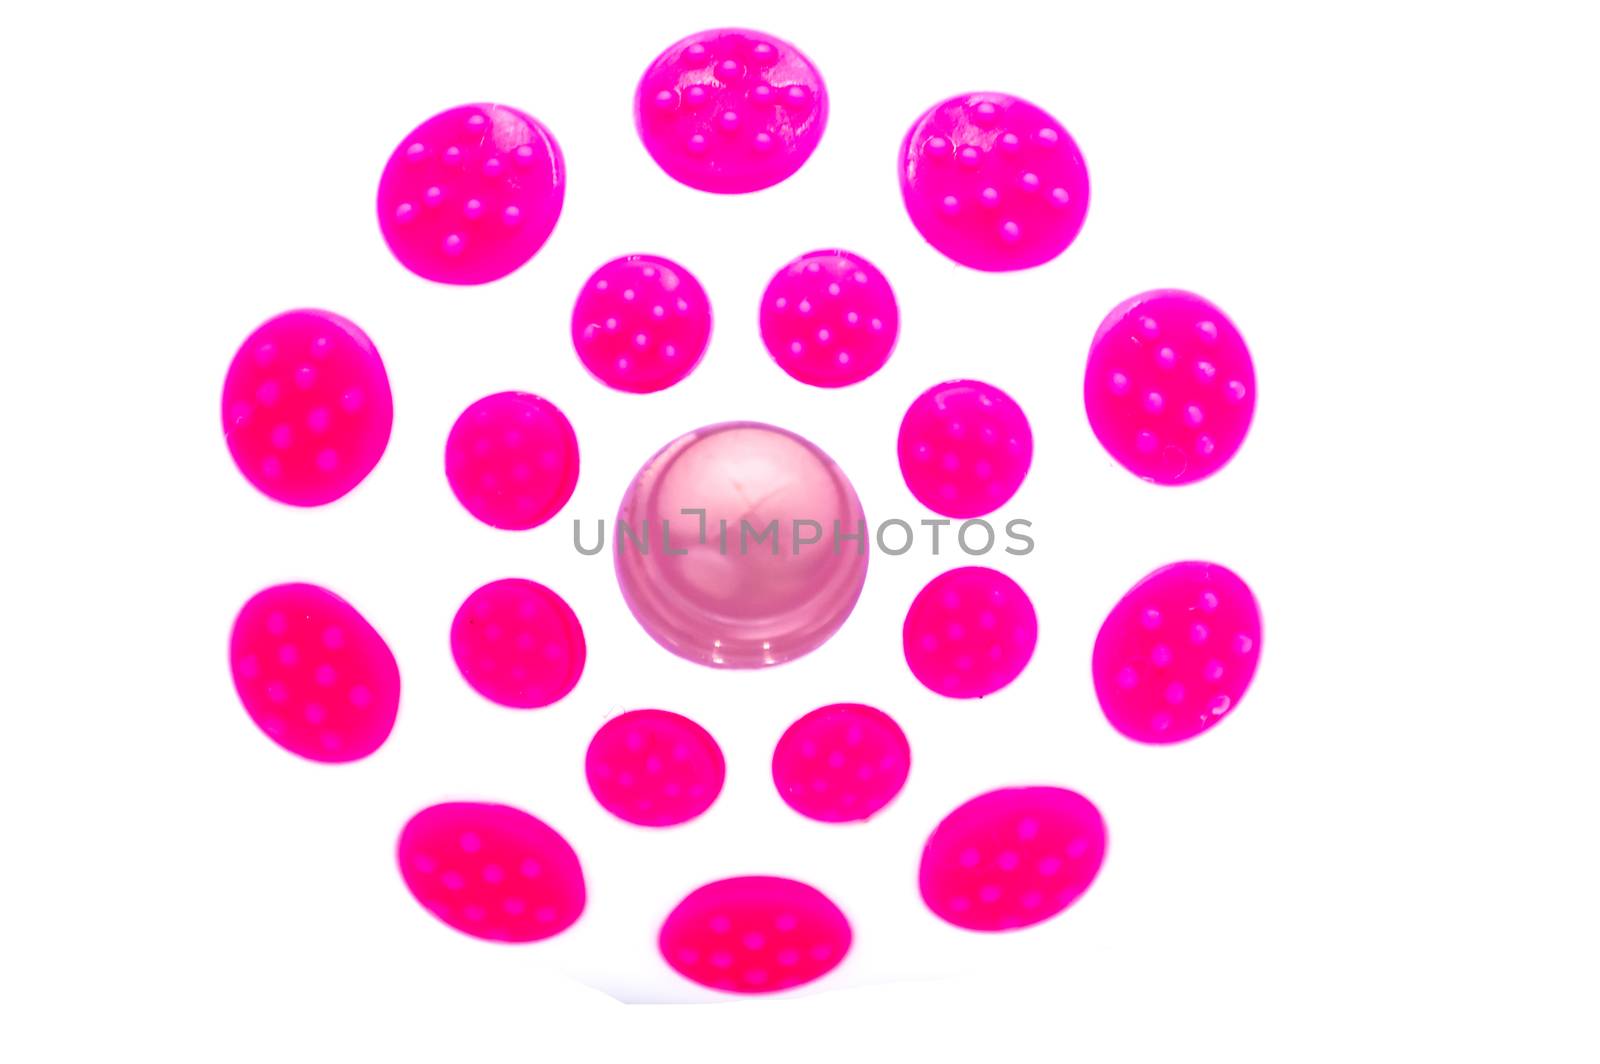 Graphic resource with red dots on a white background